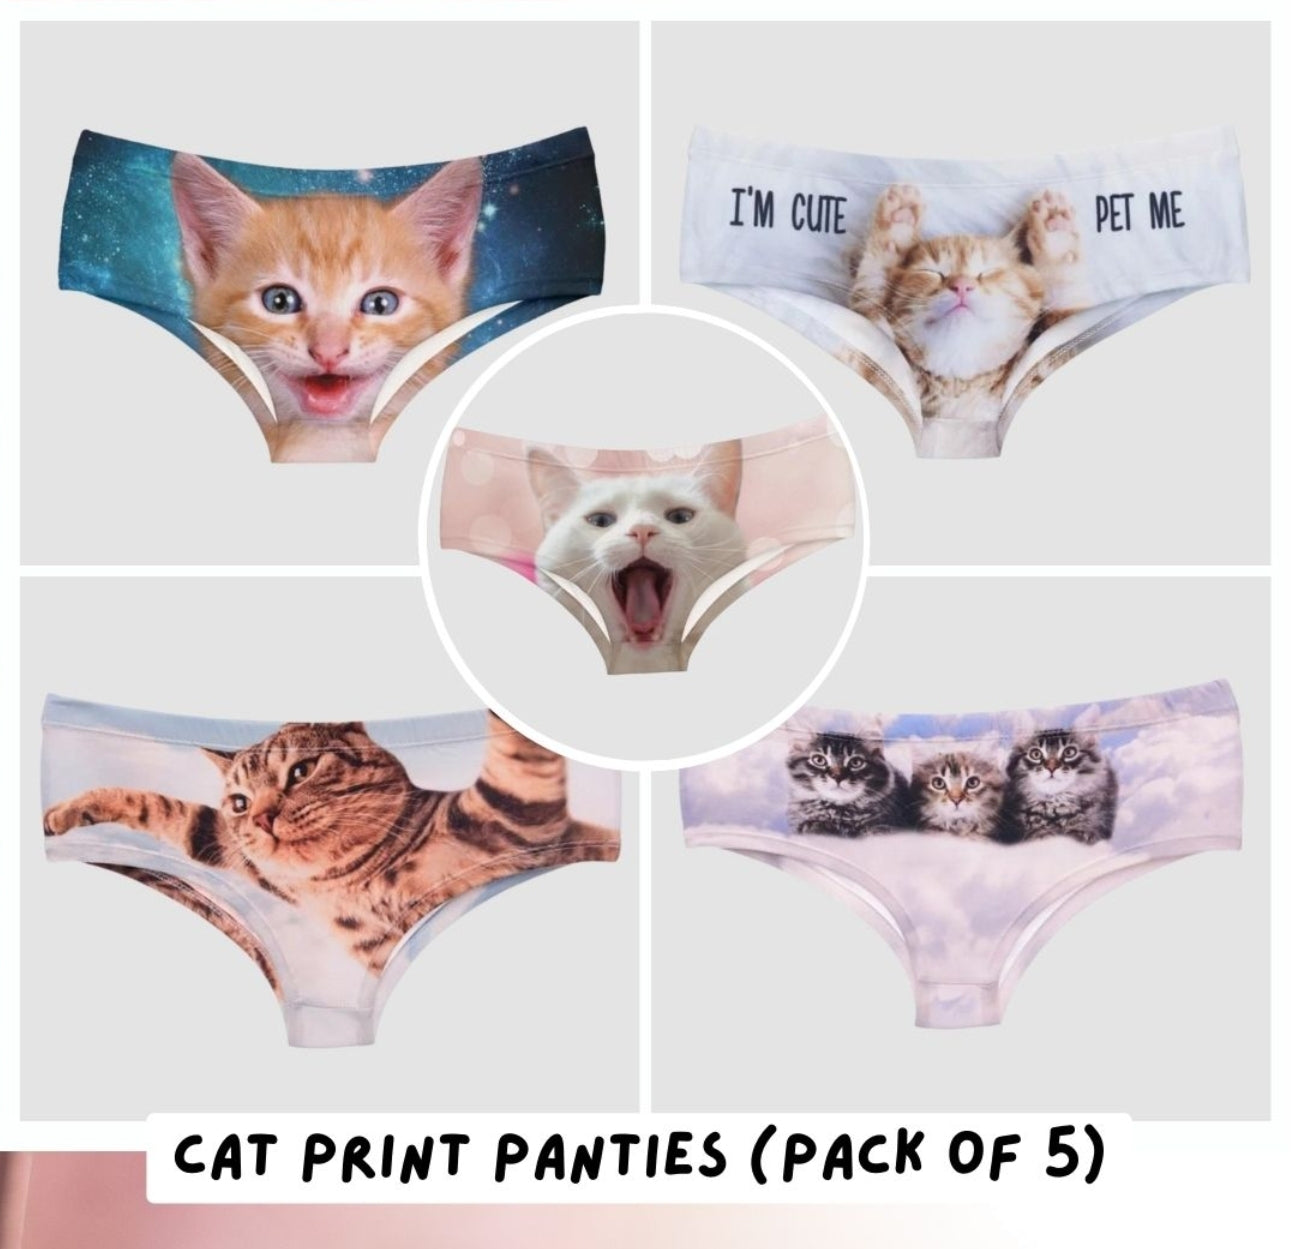 Cat Print Panties (Pack of 5) - Super Kitty Cats